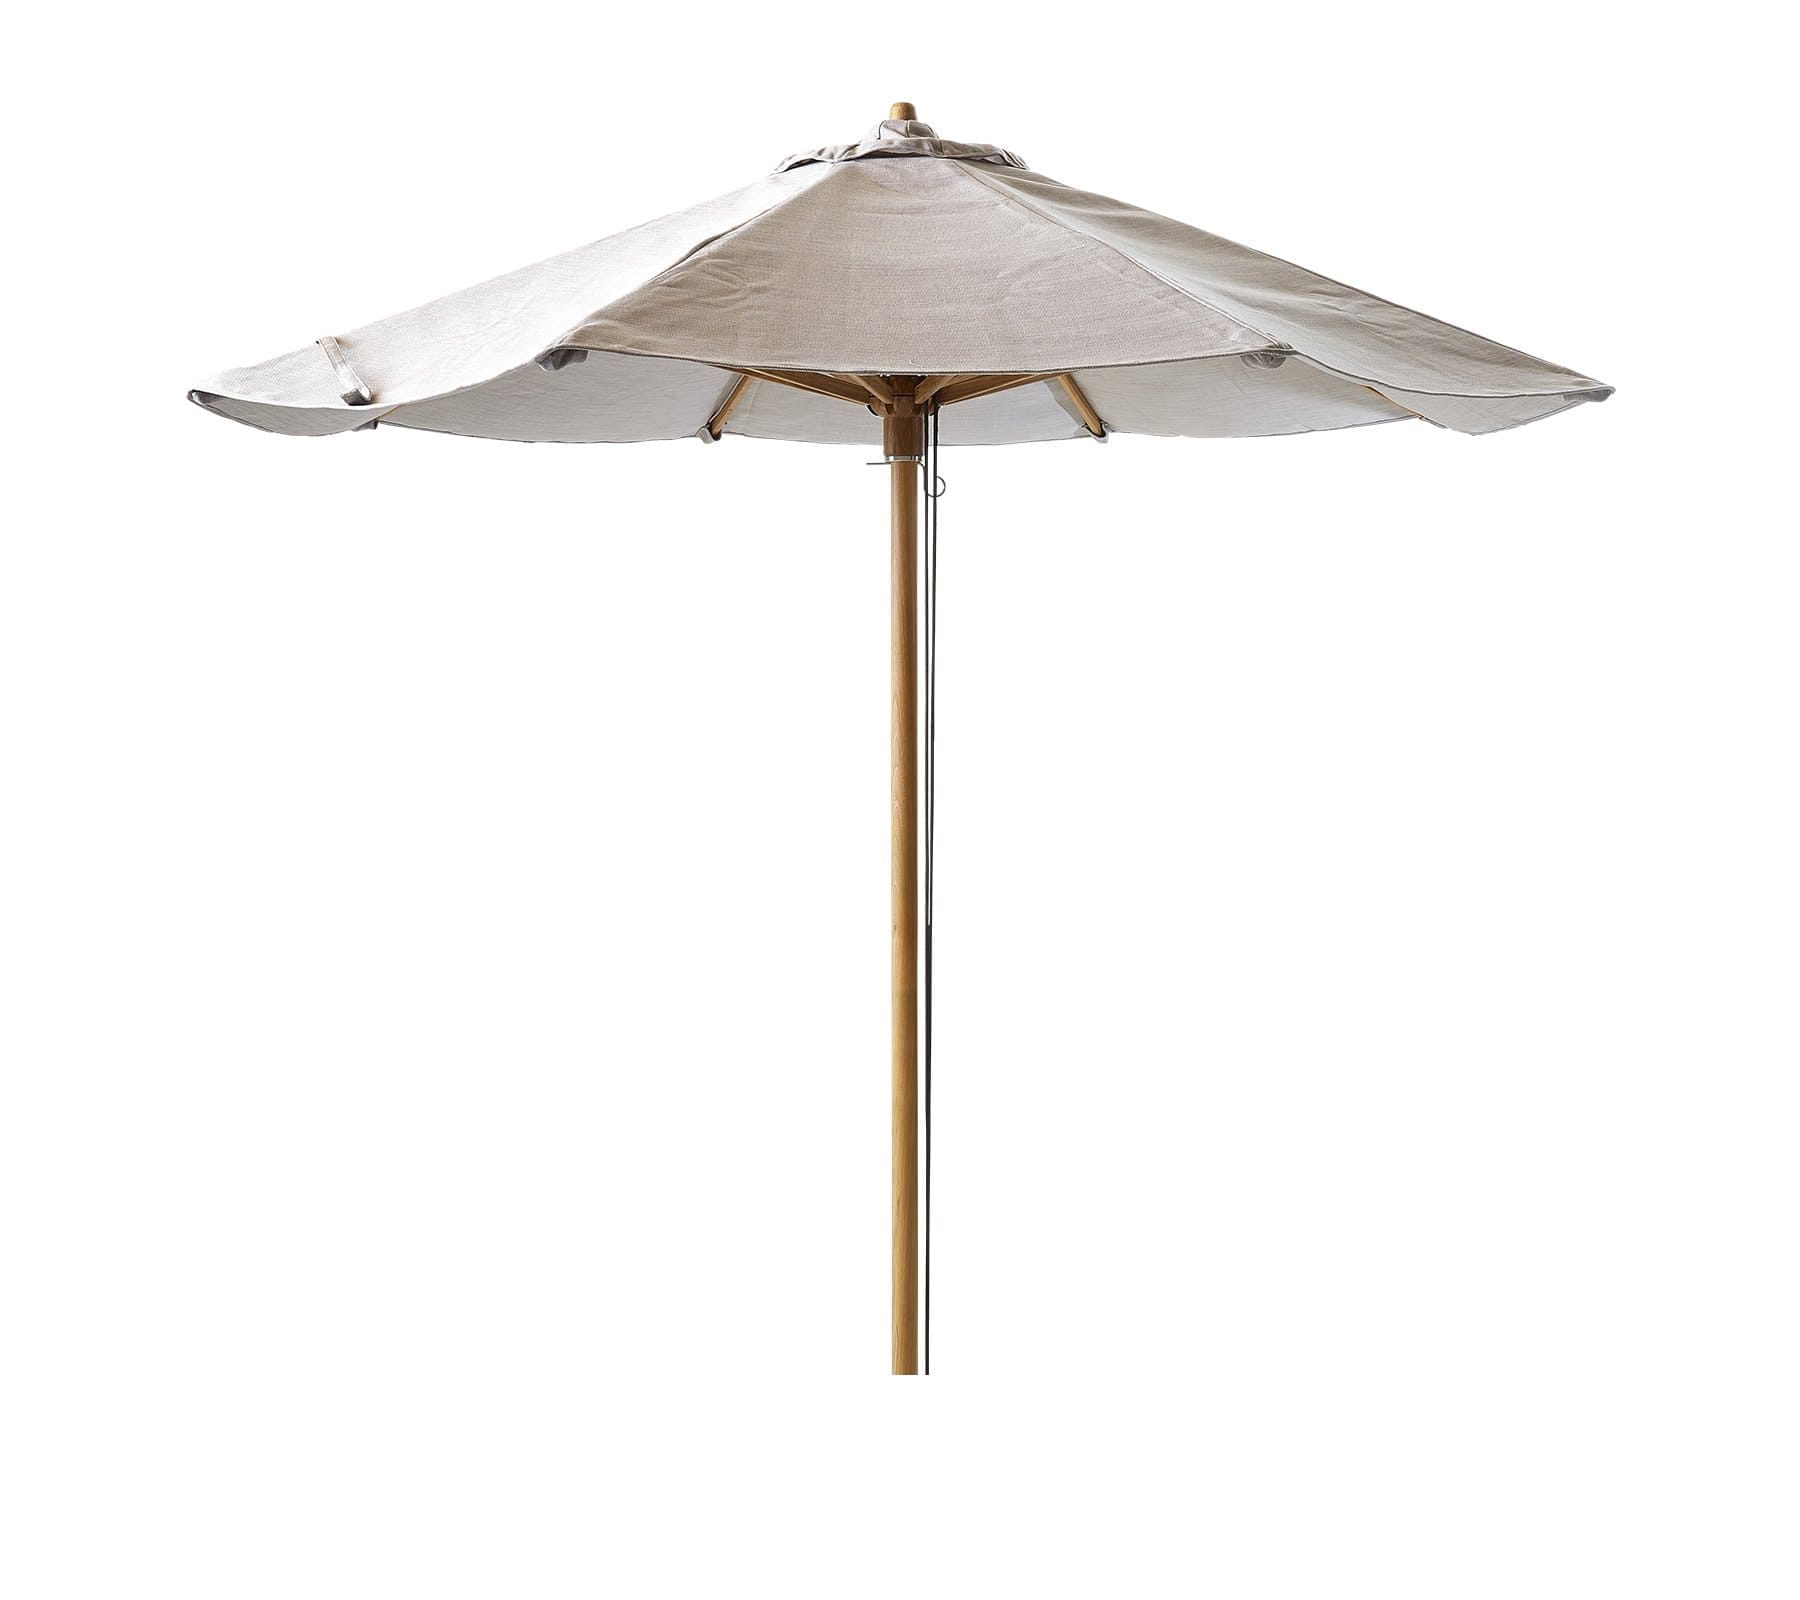 Classic Parasol with Pulley System